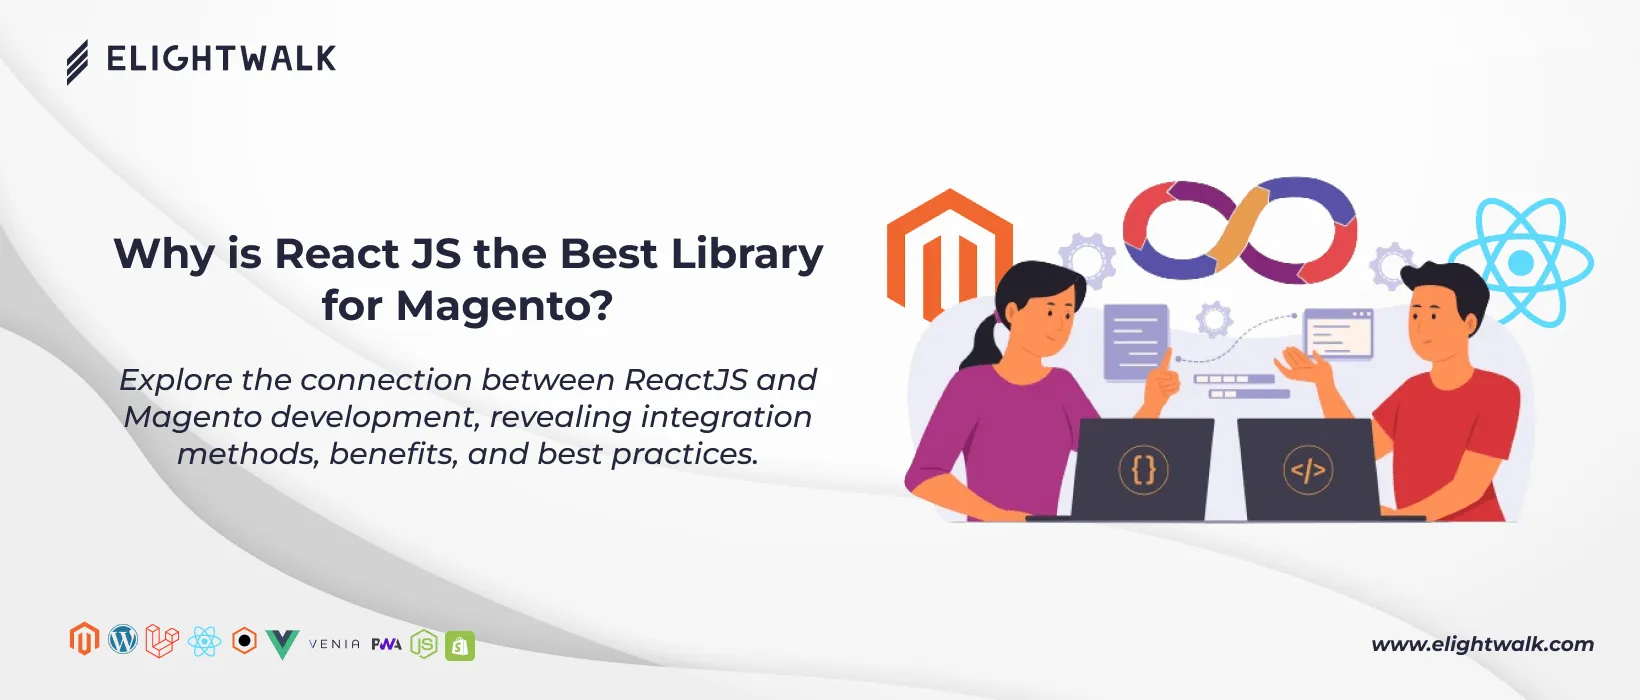 ReactJs is the best library for Magento 